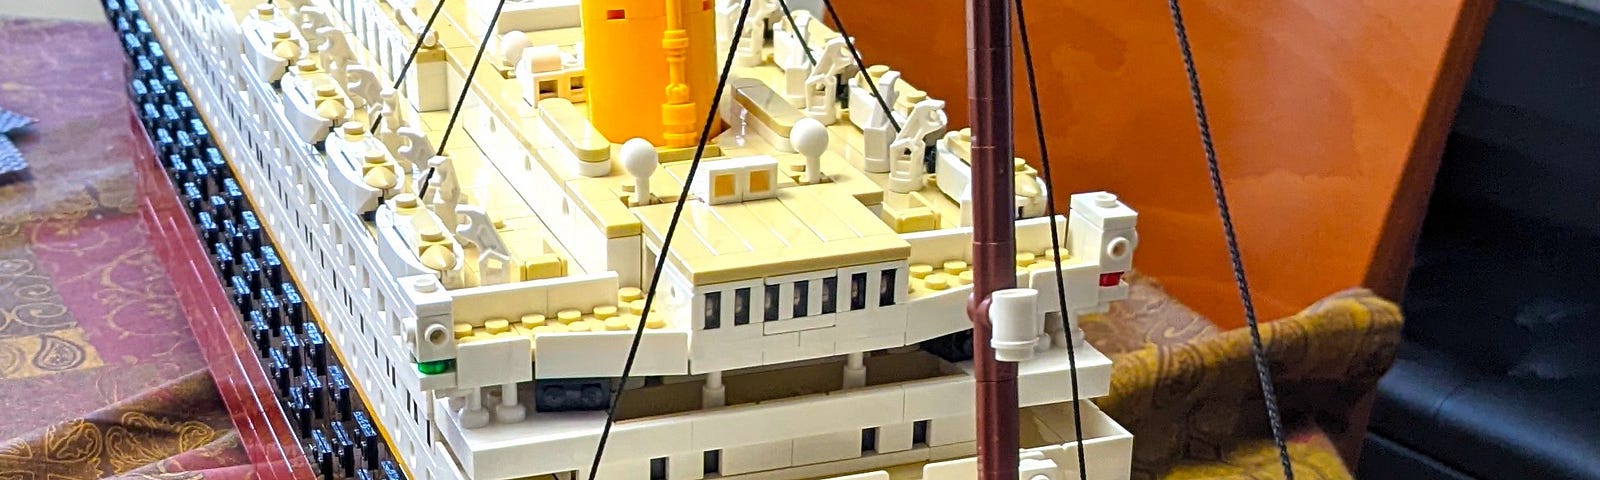 RMS Titanic ship model created out of LEGO pieces displayed on a dining room table.